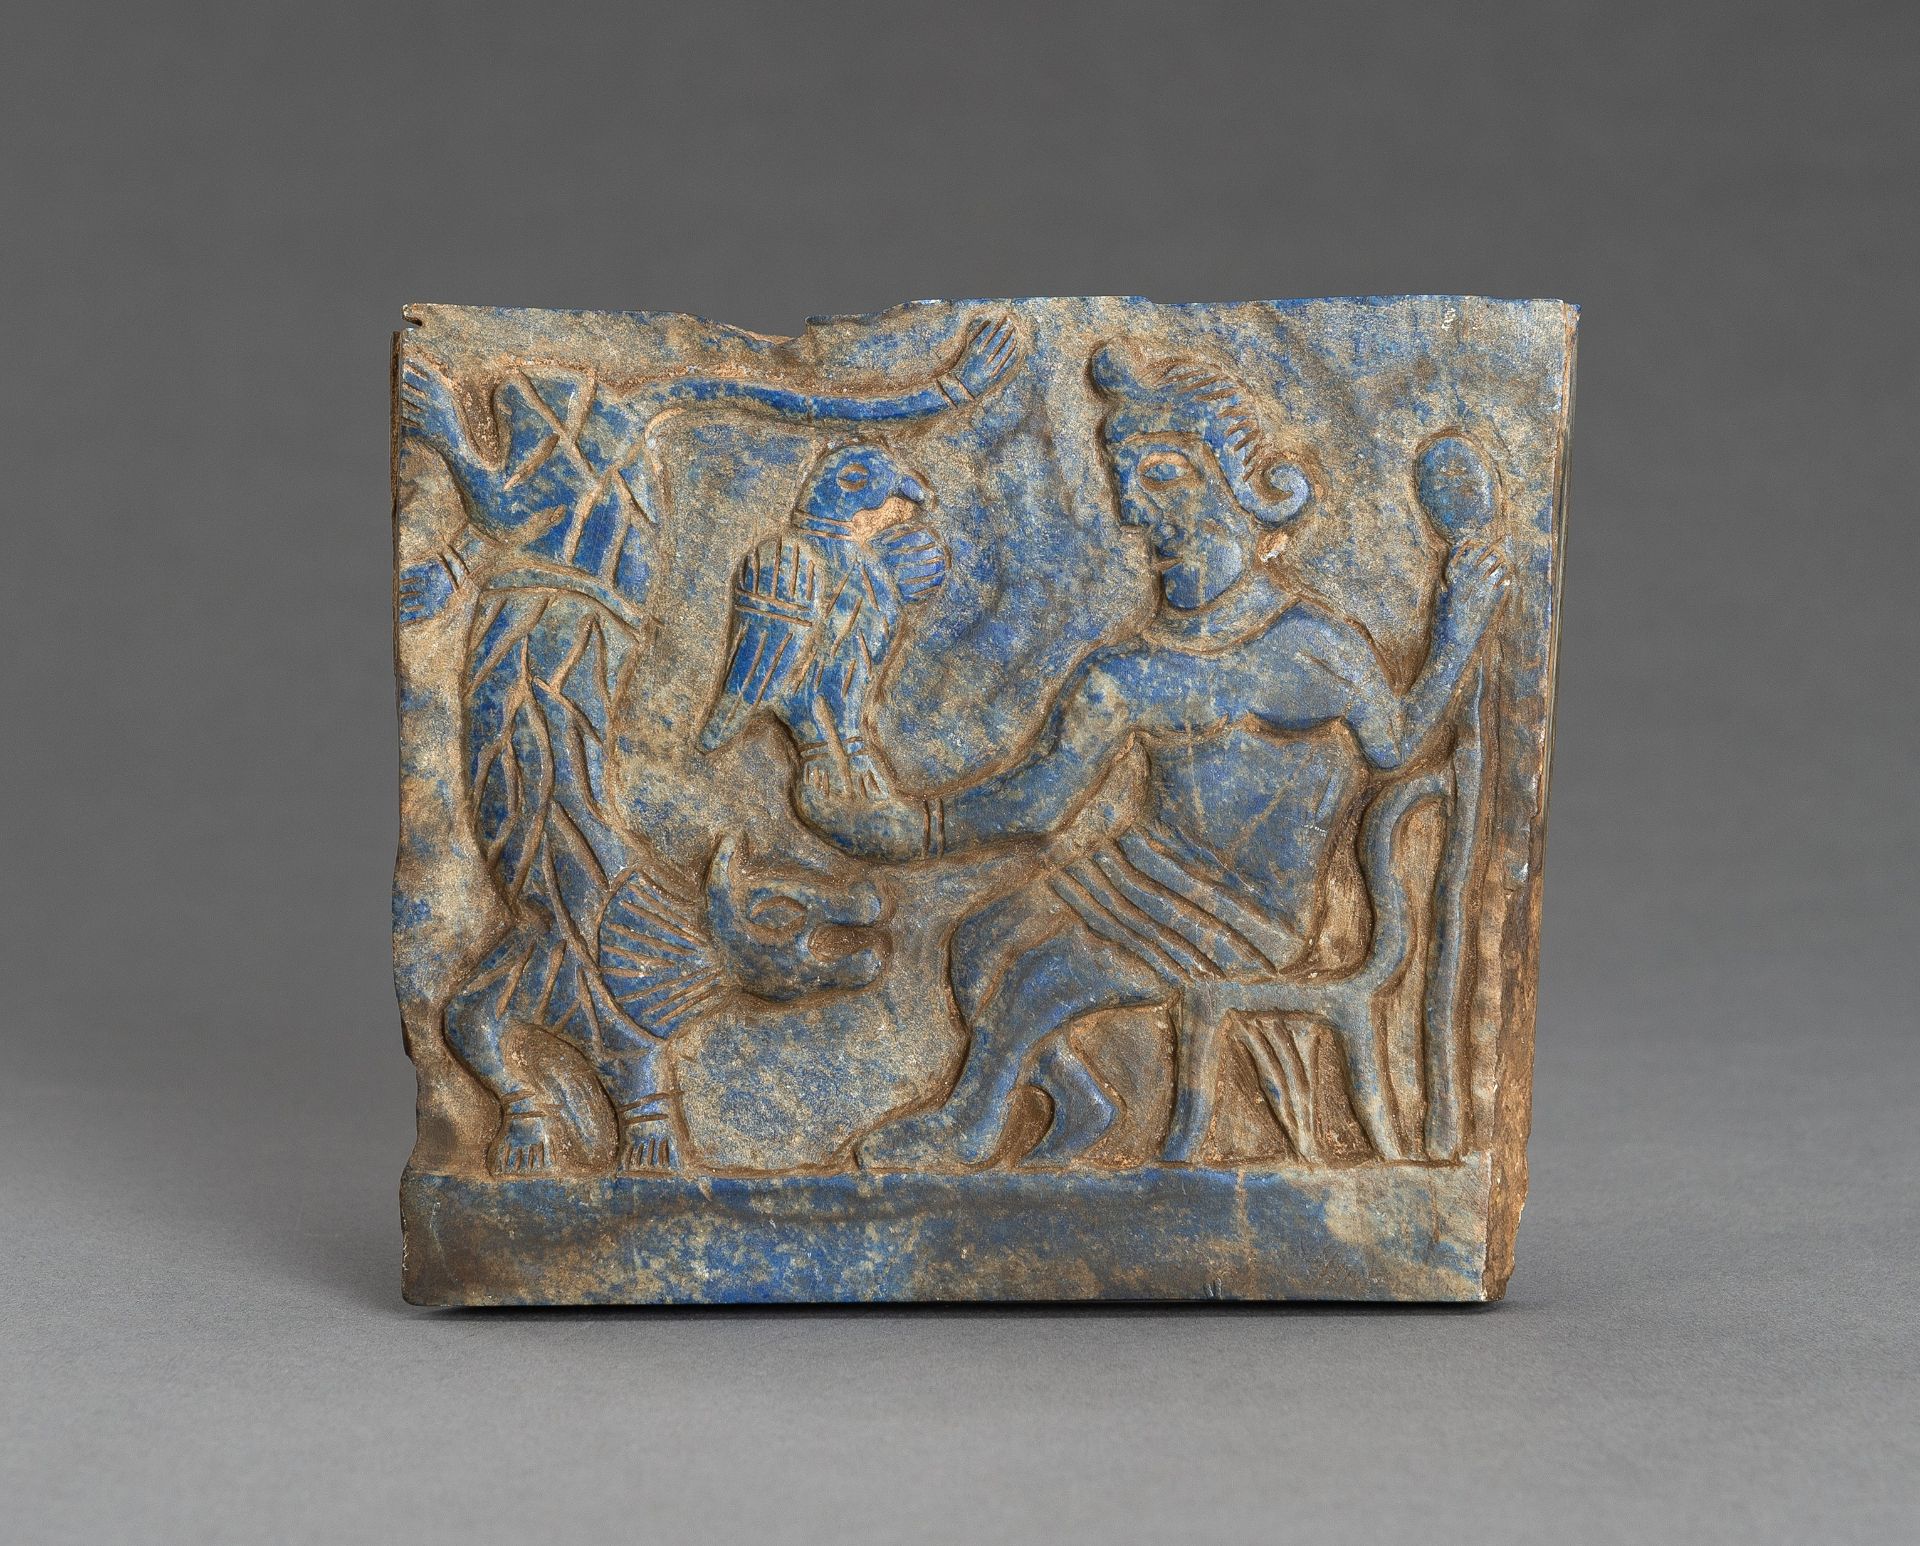 A LAPIS LAZULI FRIEZE OF A DIGNITARY WITH TIGER